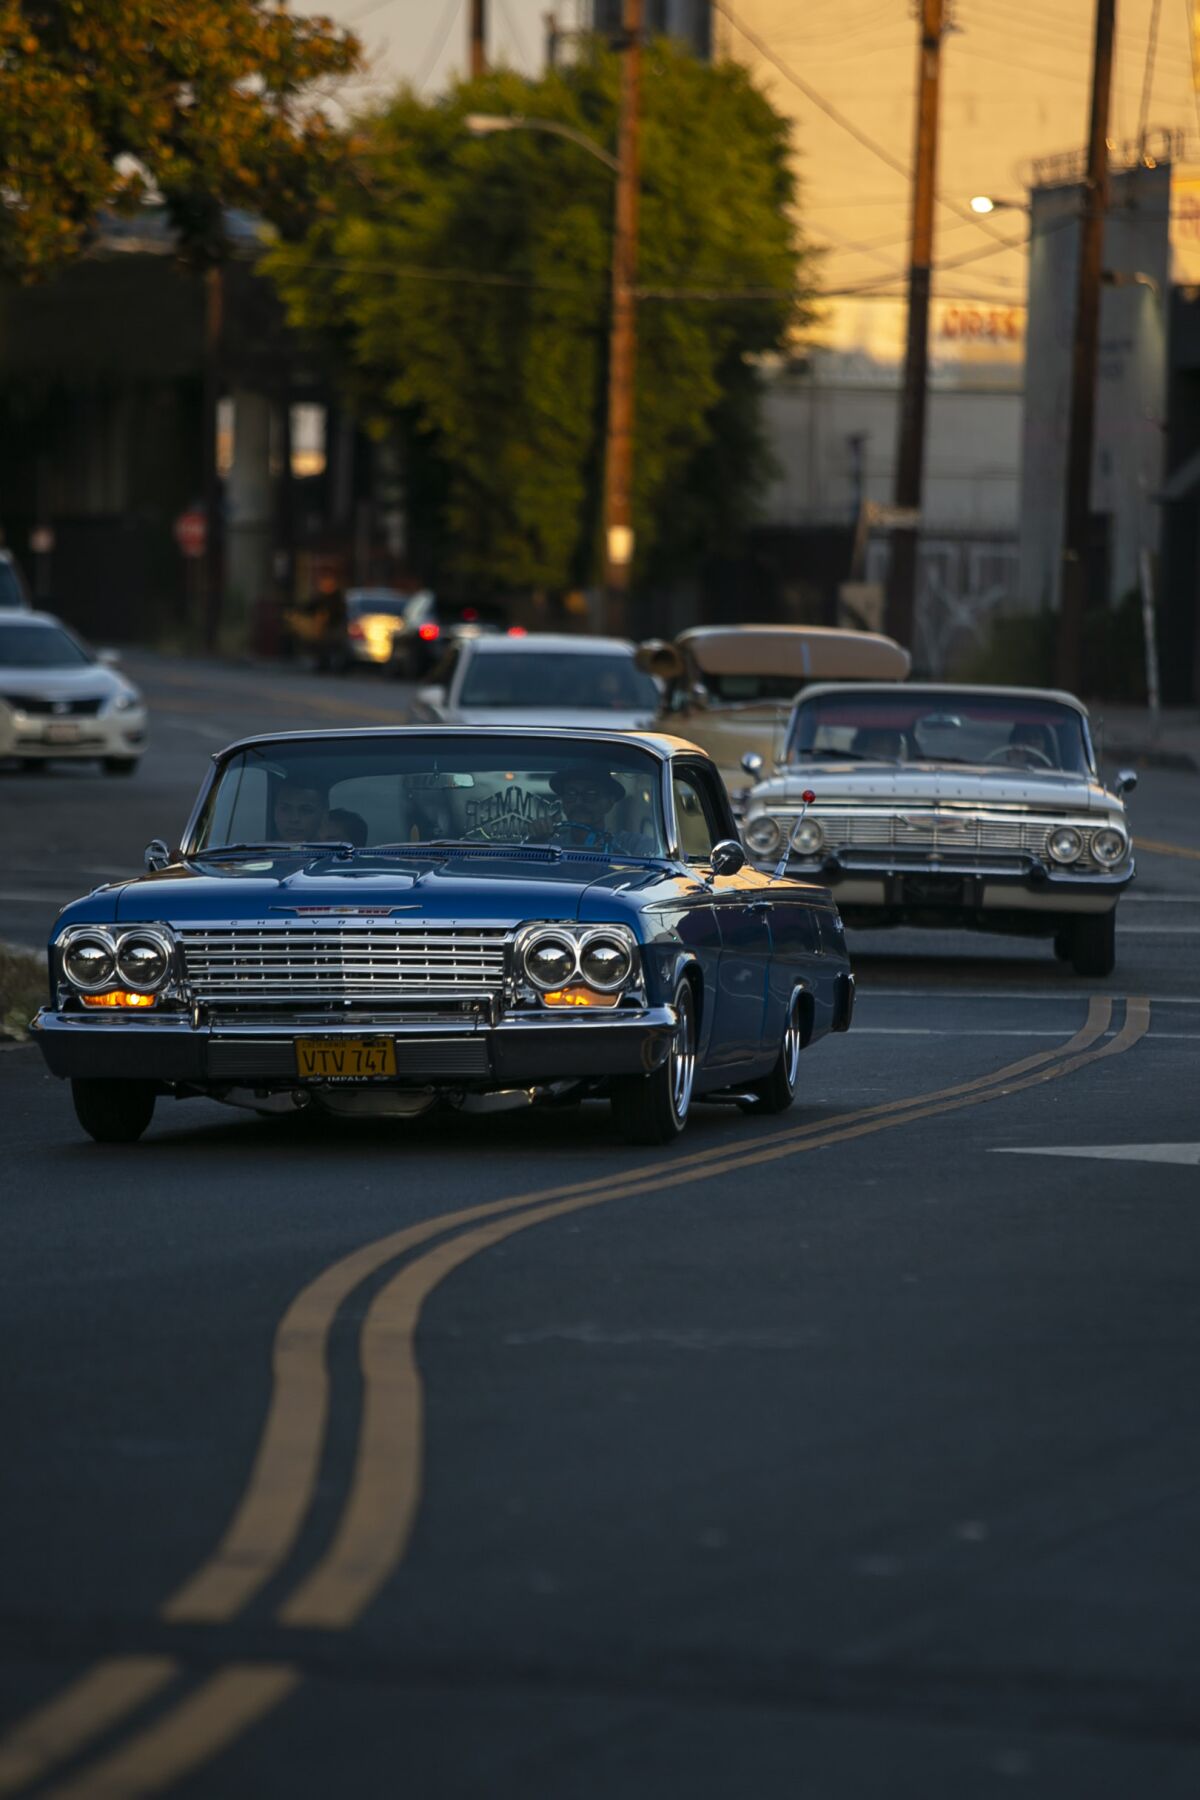 Cars arrive for a lowrider event near East 15th Street and Hooper Avenue in downtown L.A.